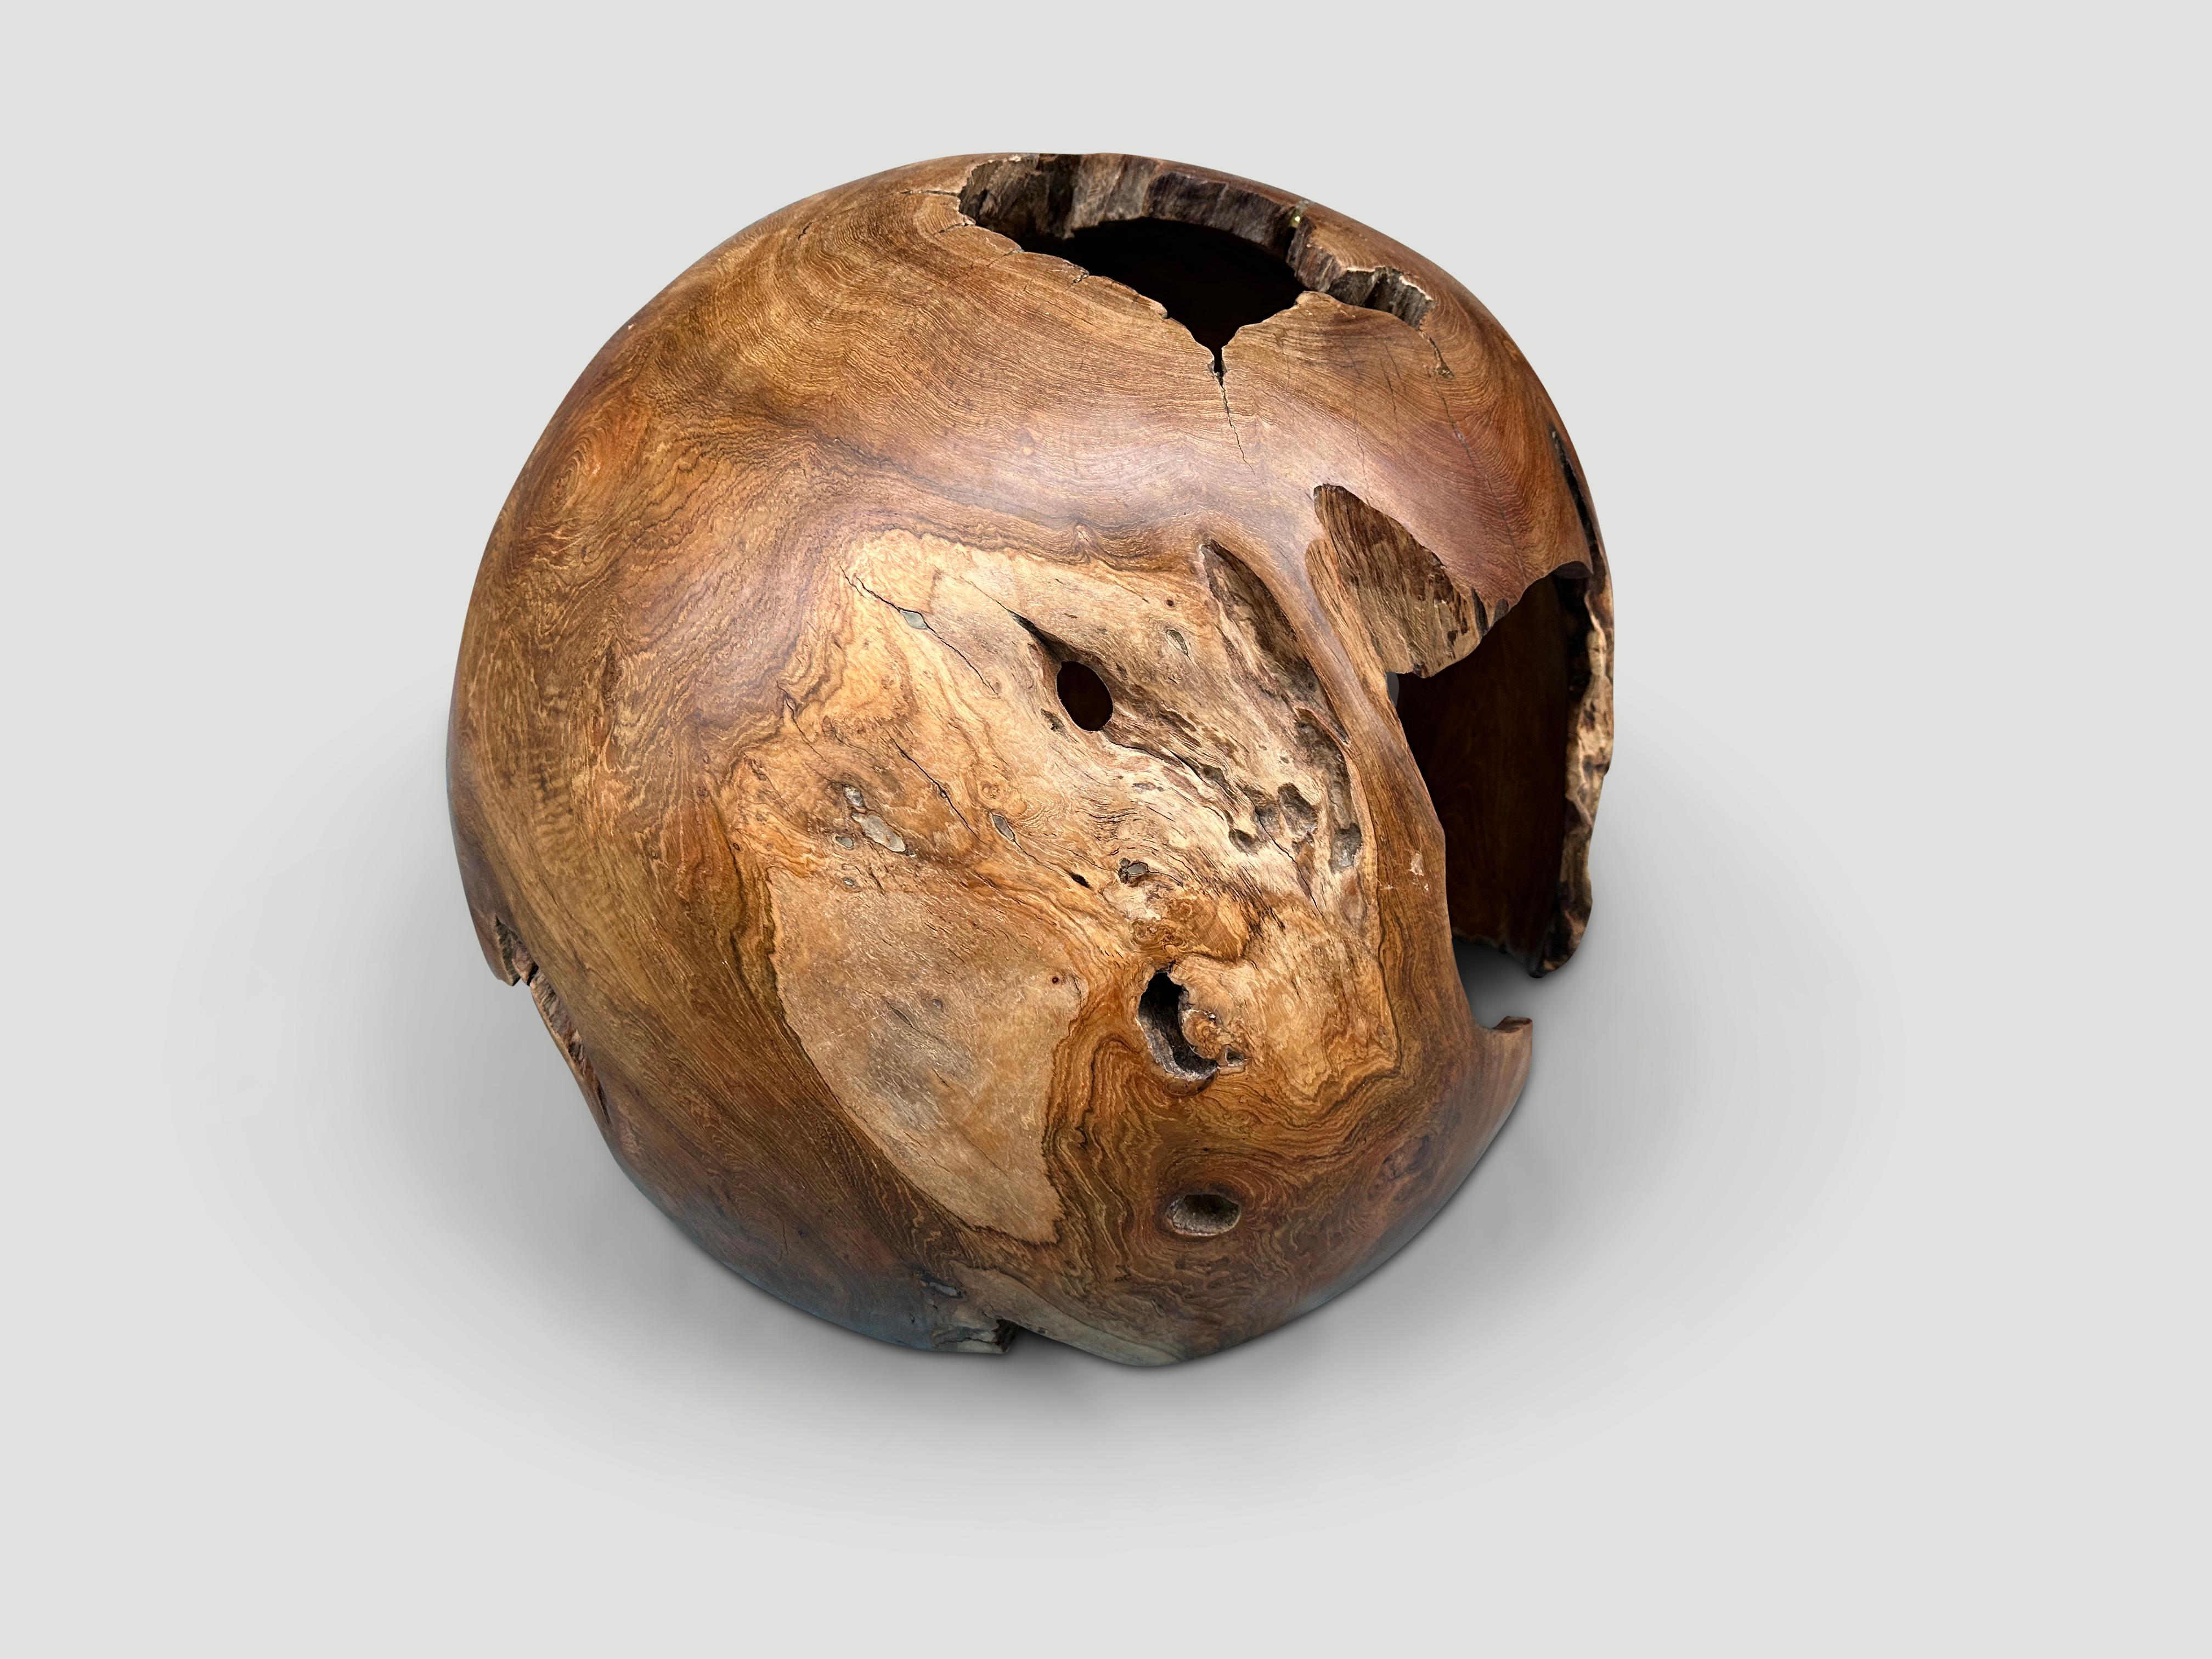 Contemporary Andrianna Shamaris Hollowed Out Teak Wood Organic Sphere  For Sale